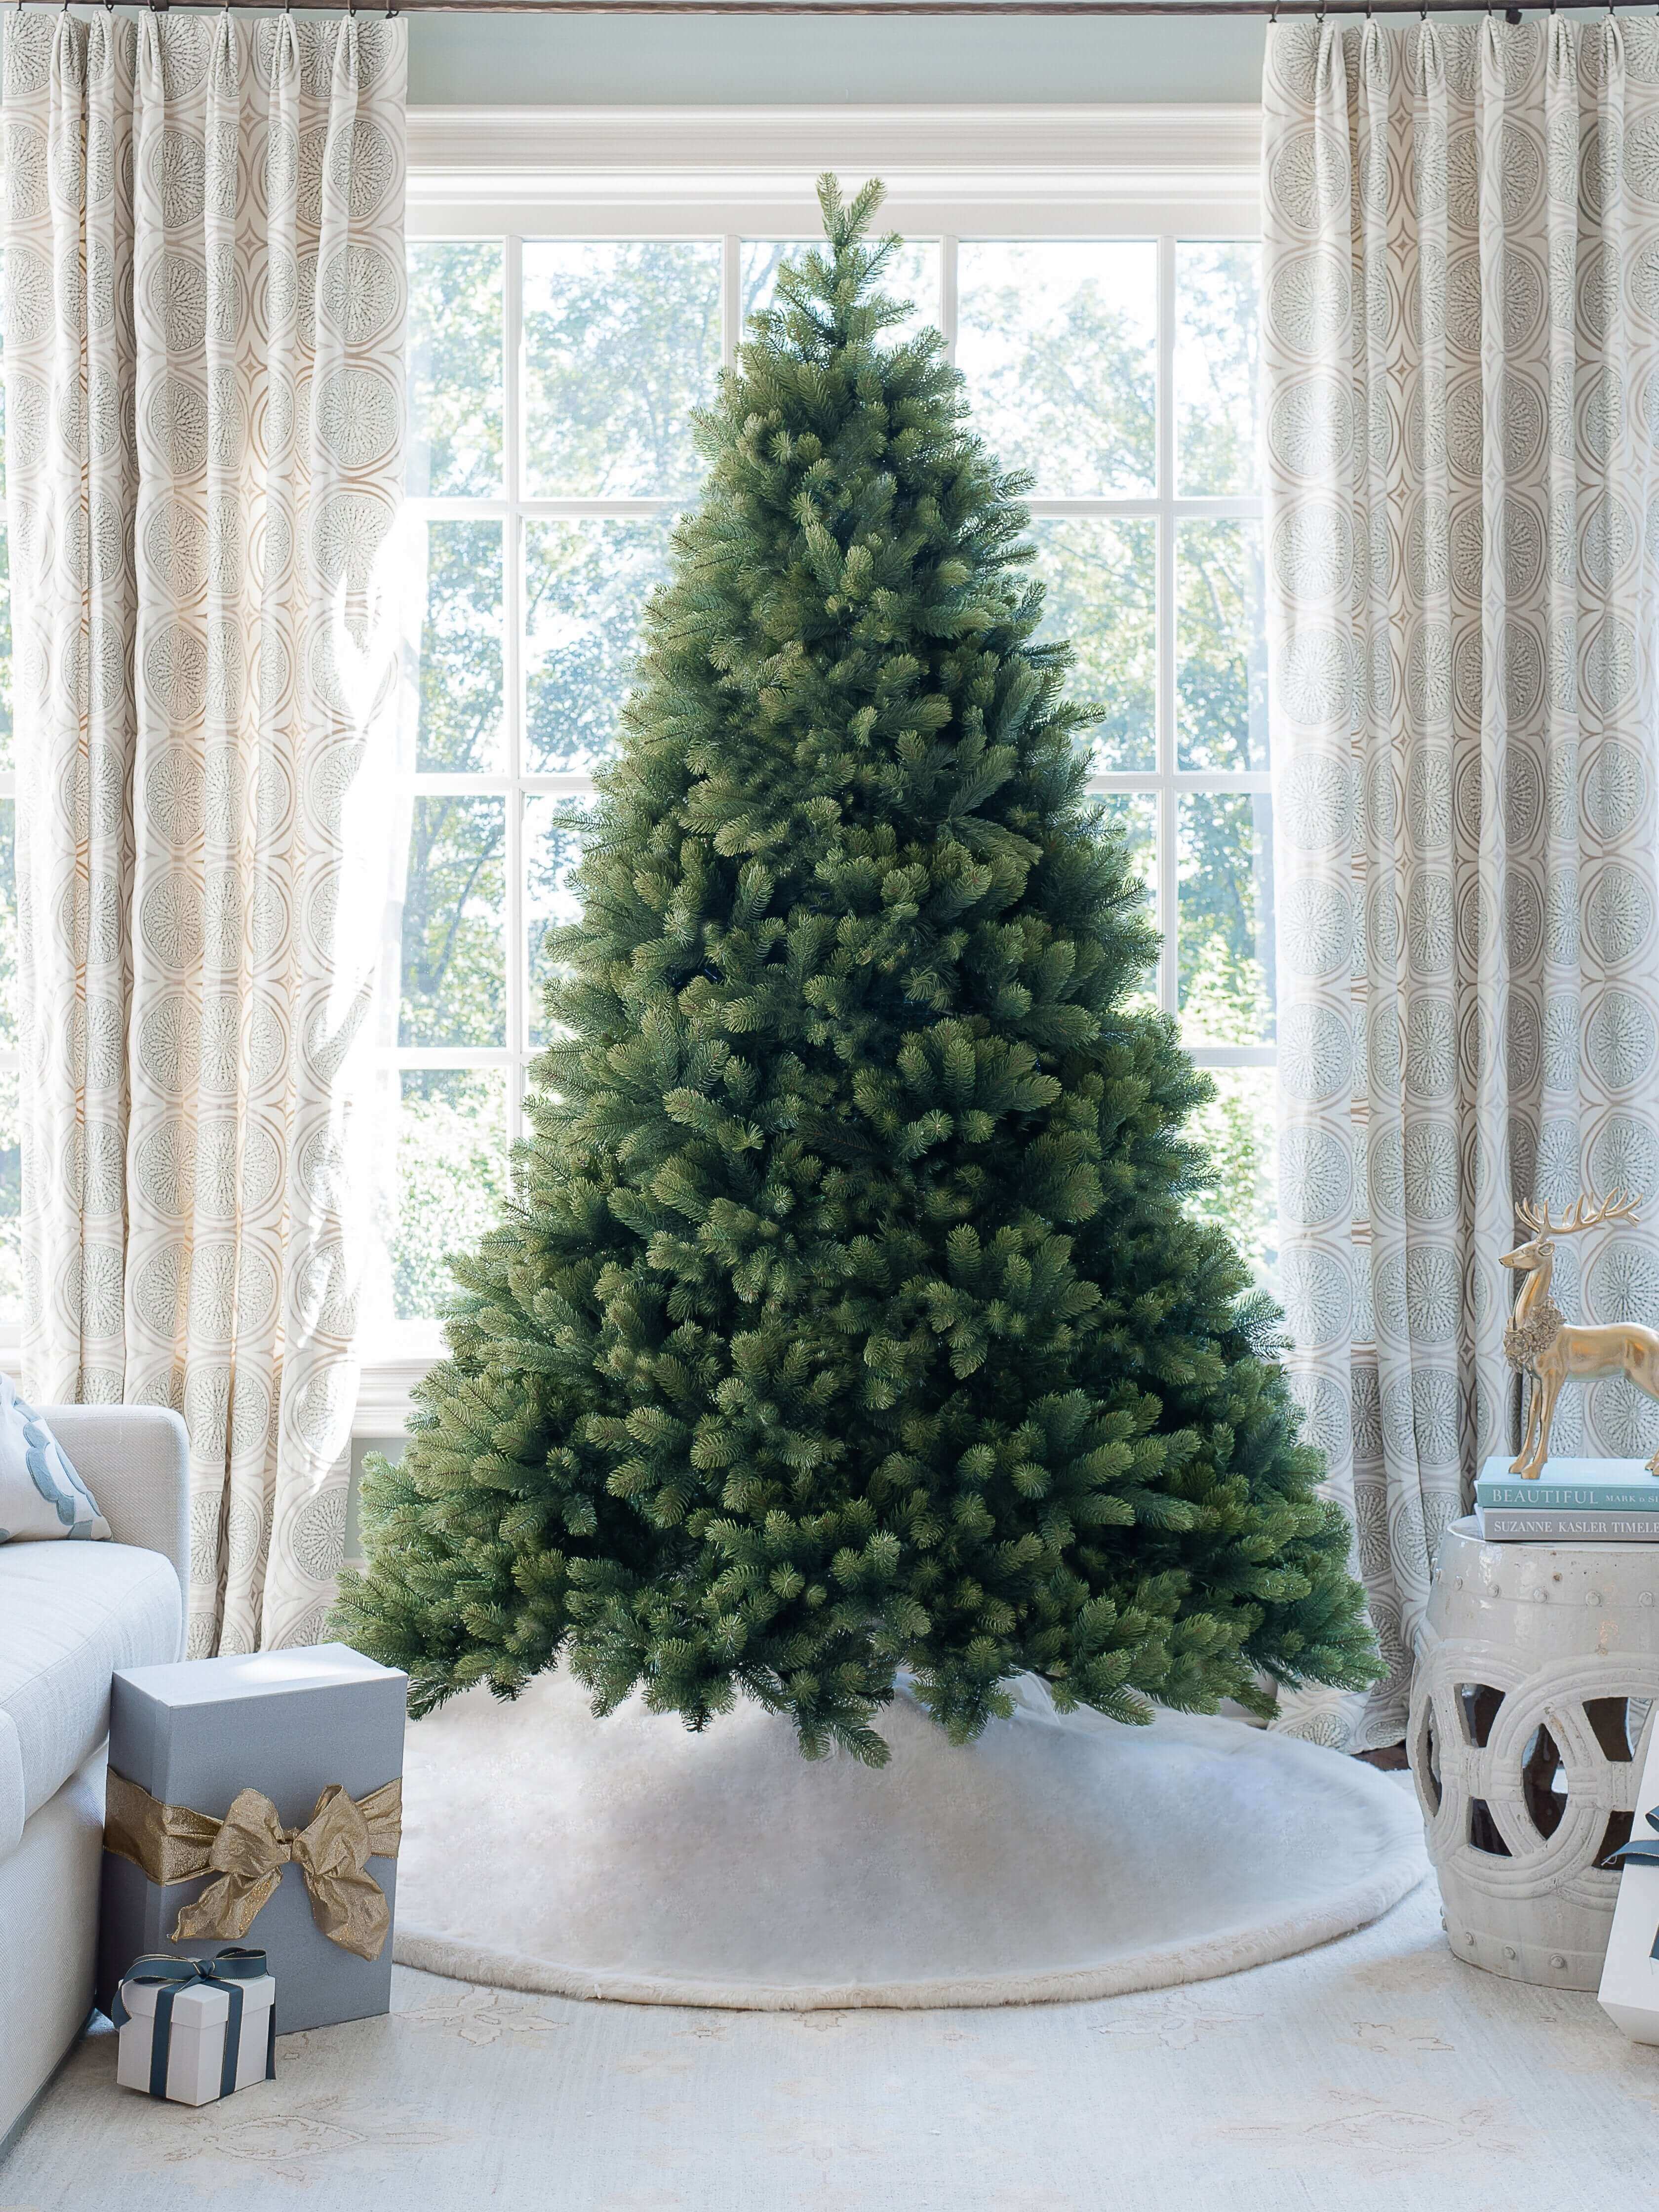 King of Christmas 7.5' Royal Fir Quick-Shape Artificial Christmas Tree with 1000 Warm White & Multi-Color LED Lights